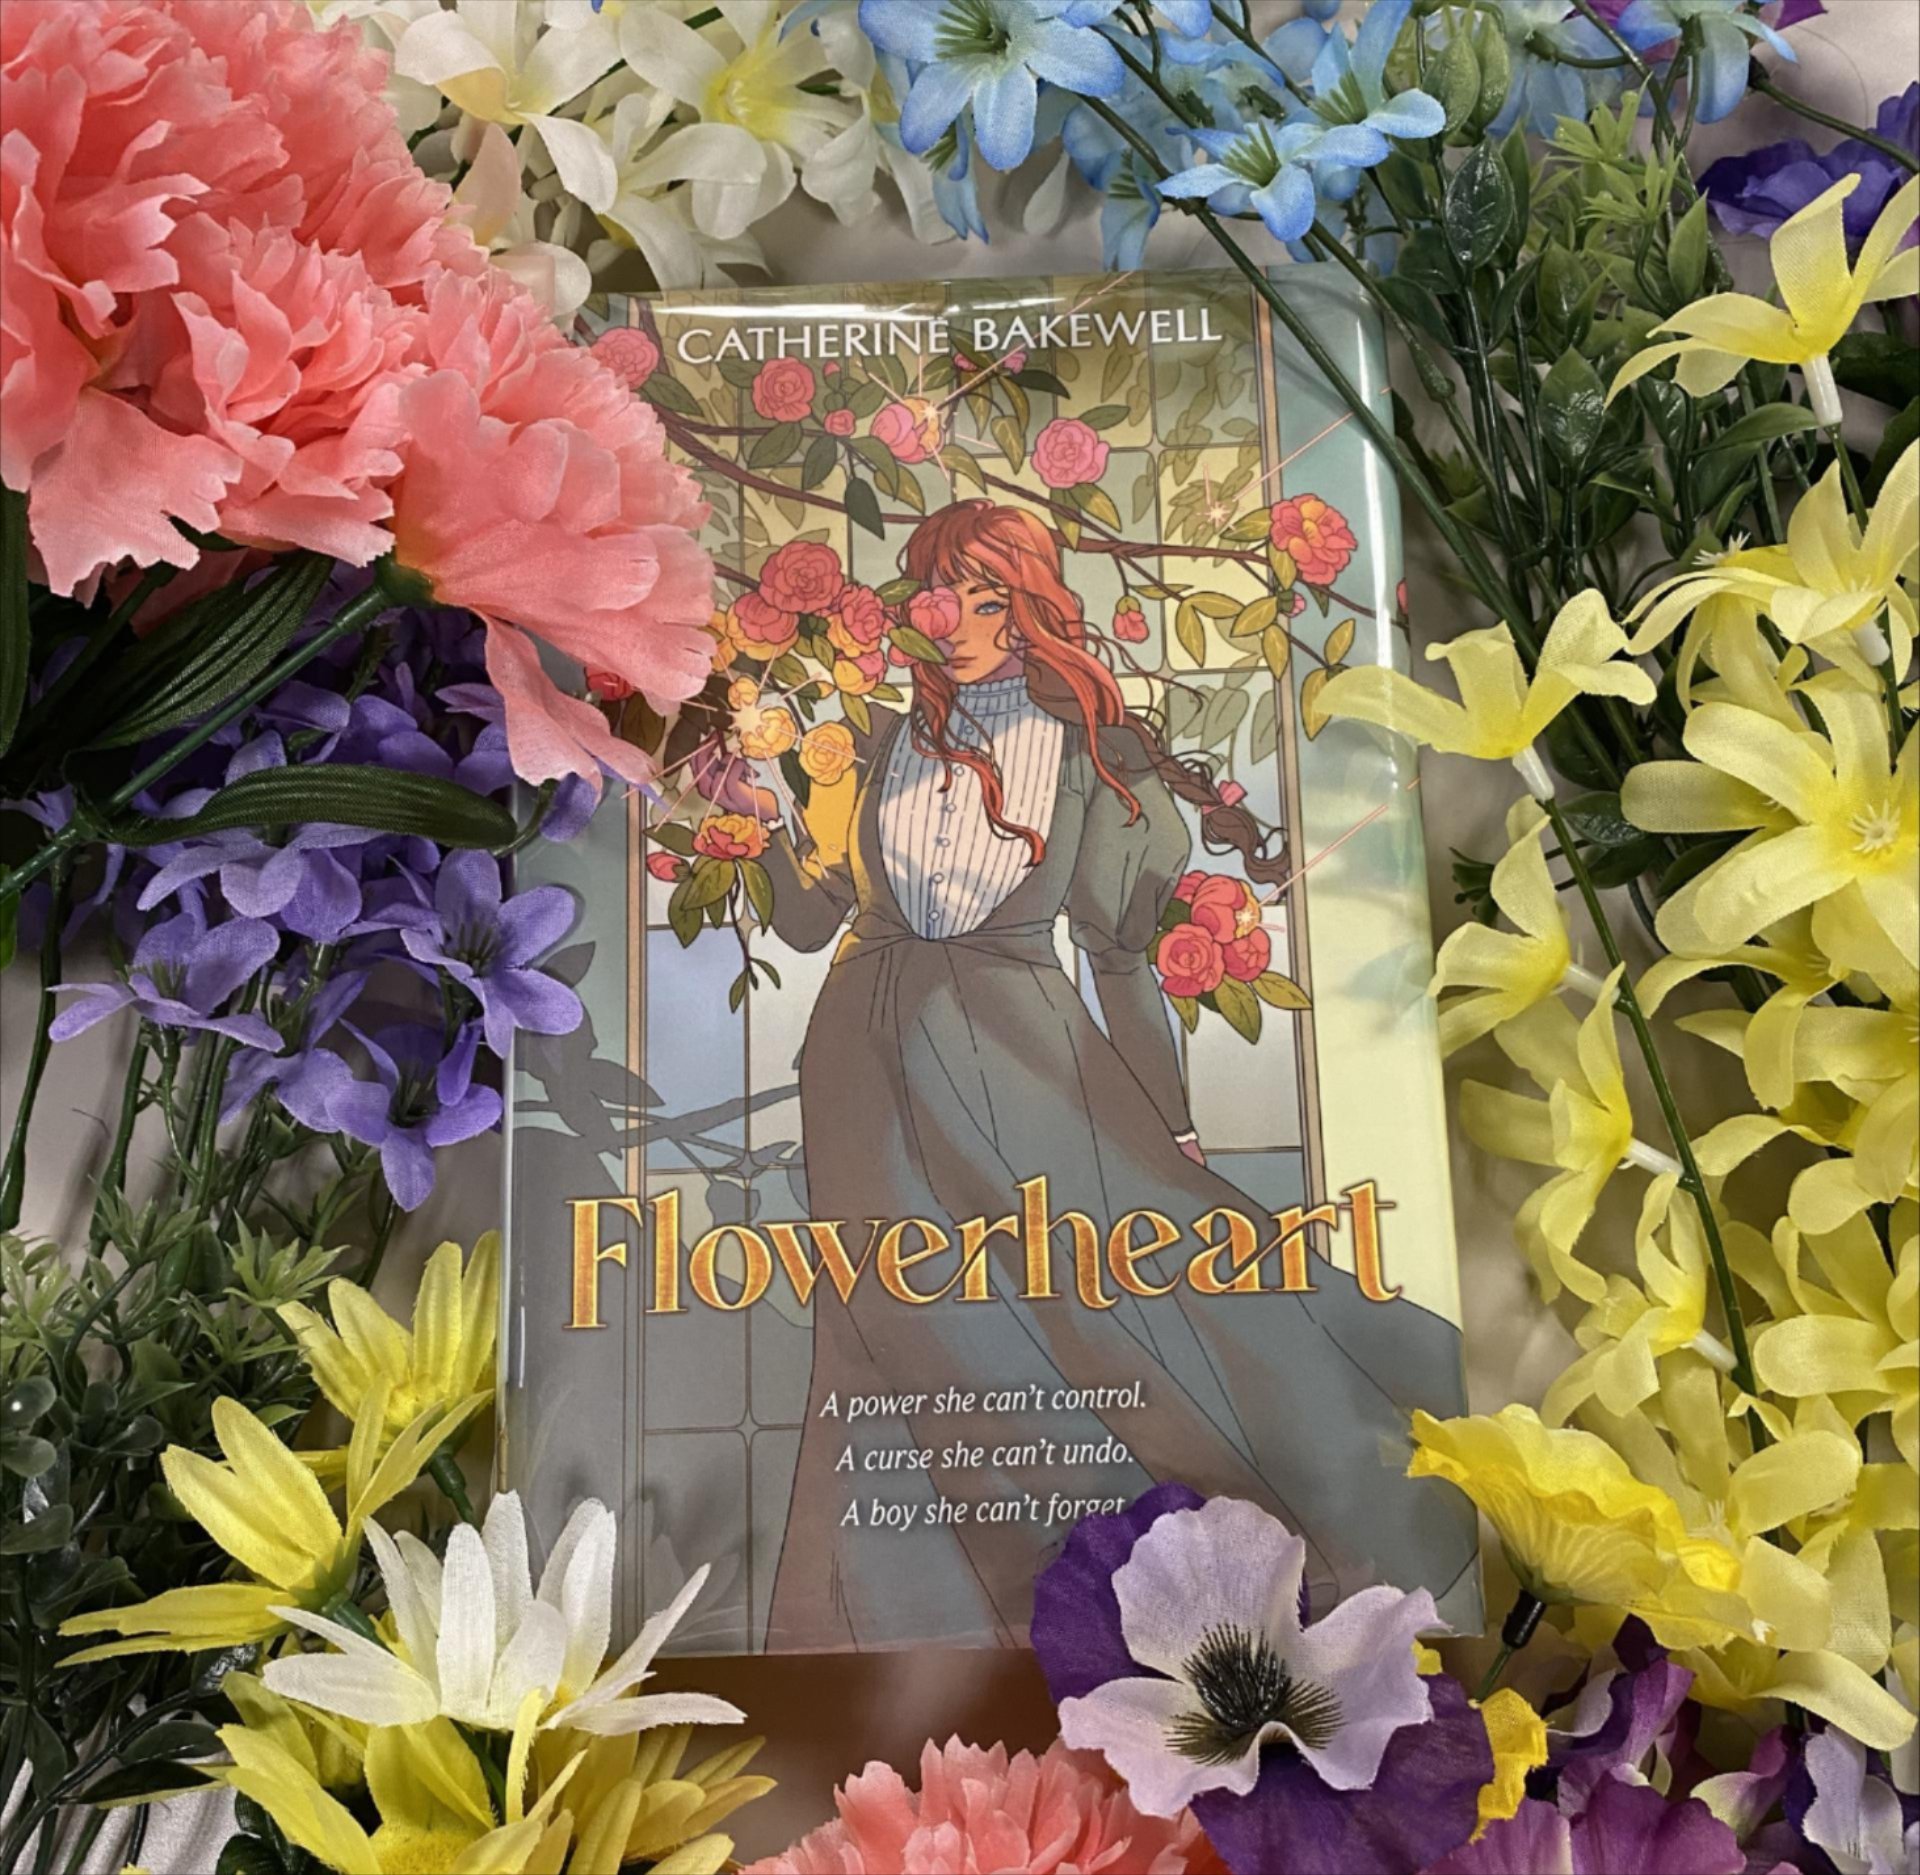 book with illustrated cover surrounded by flowers